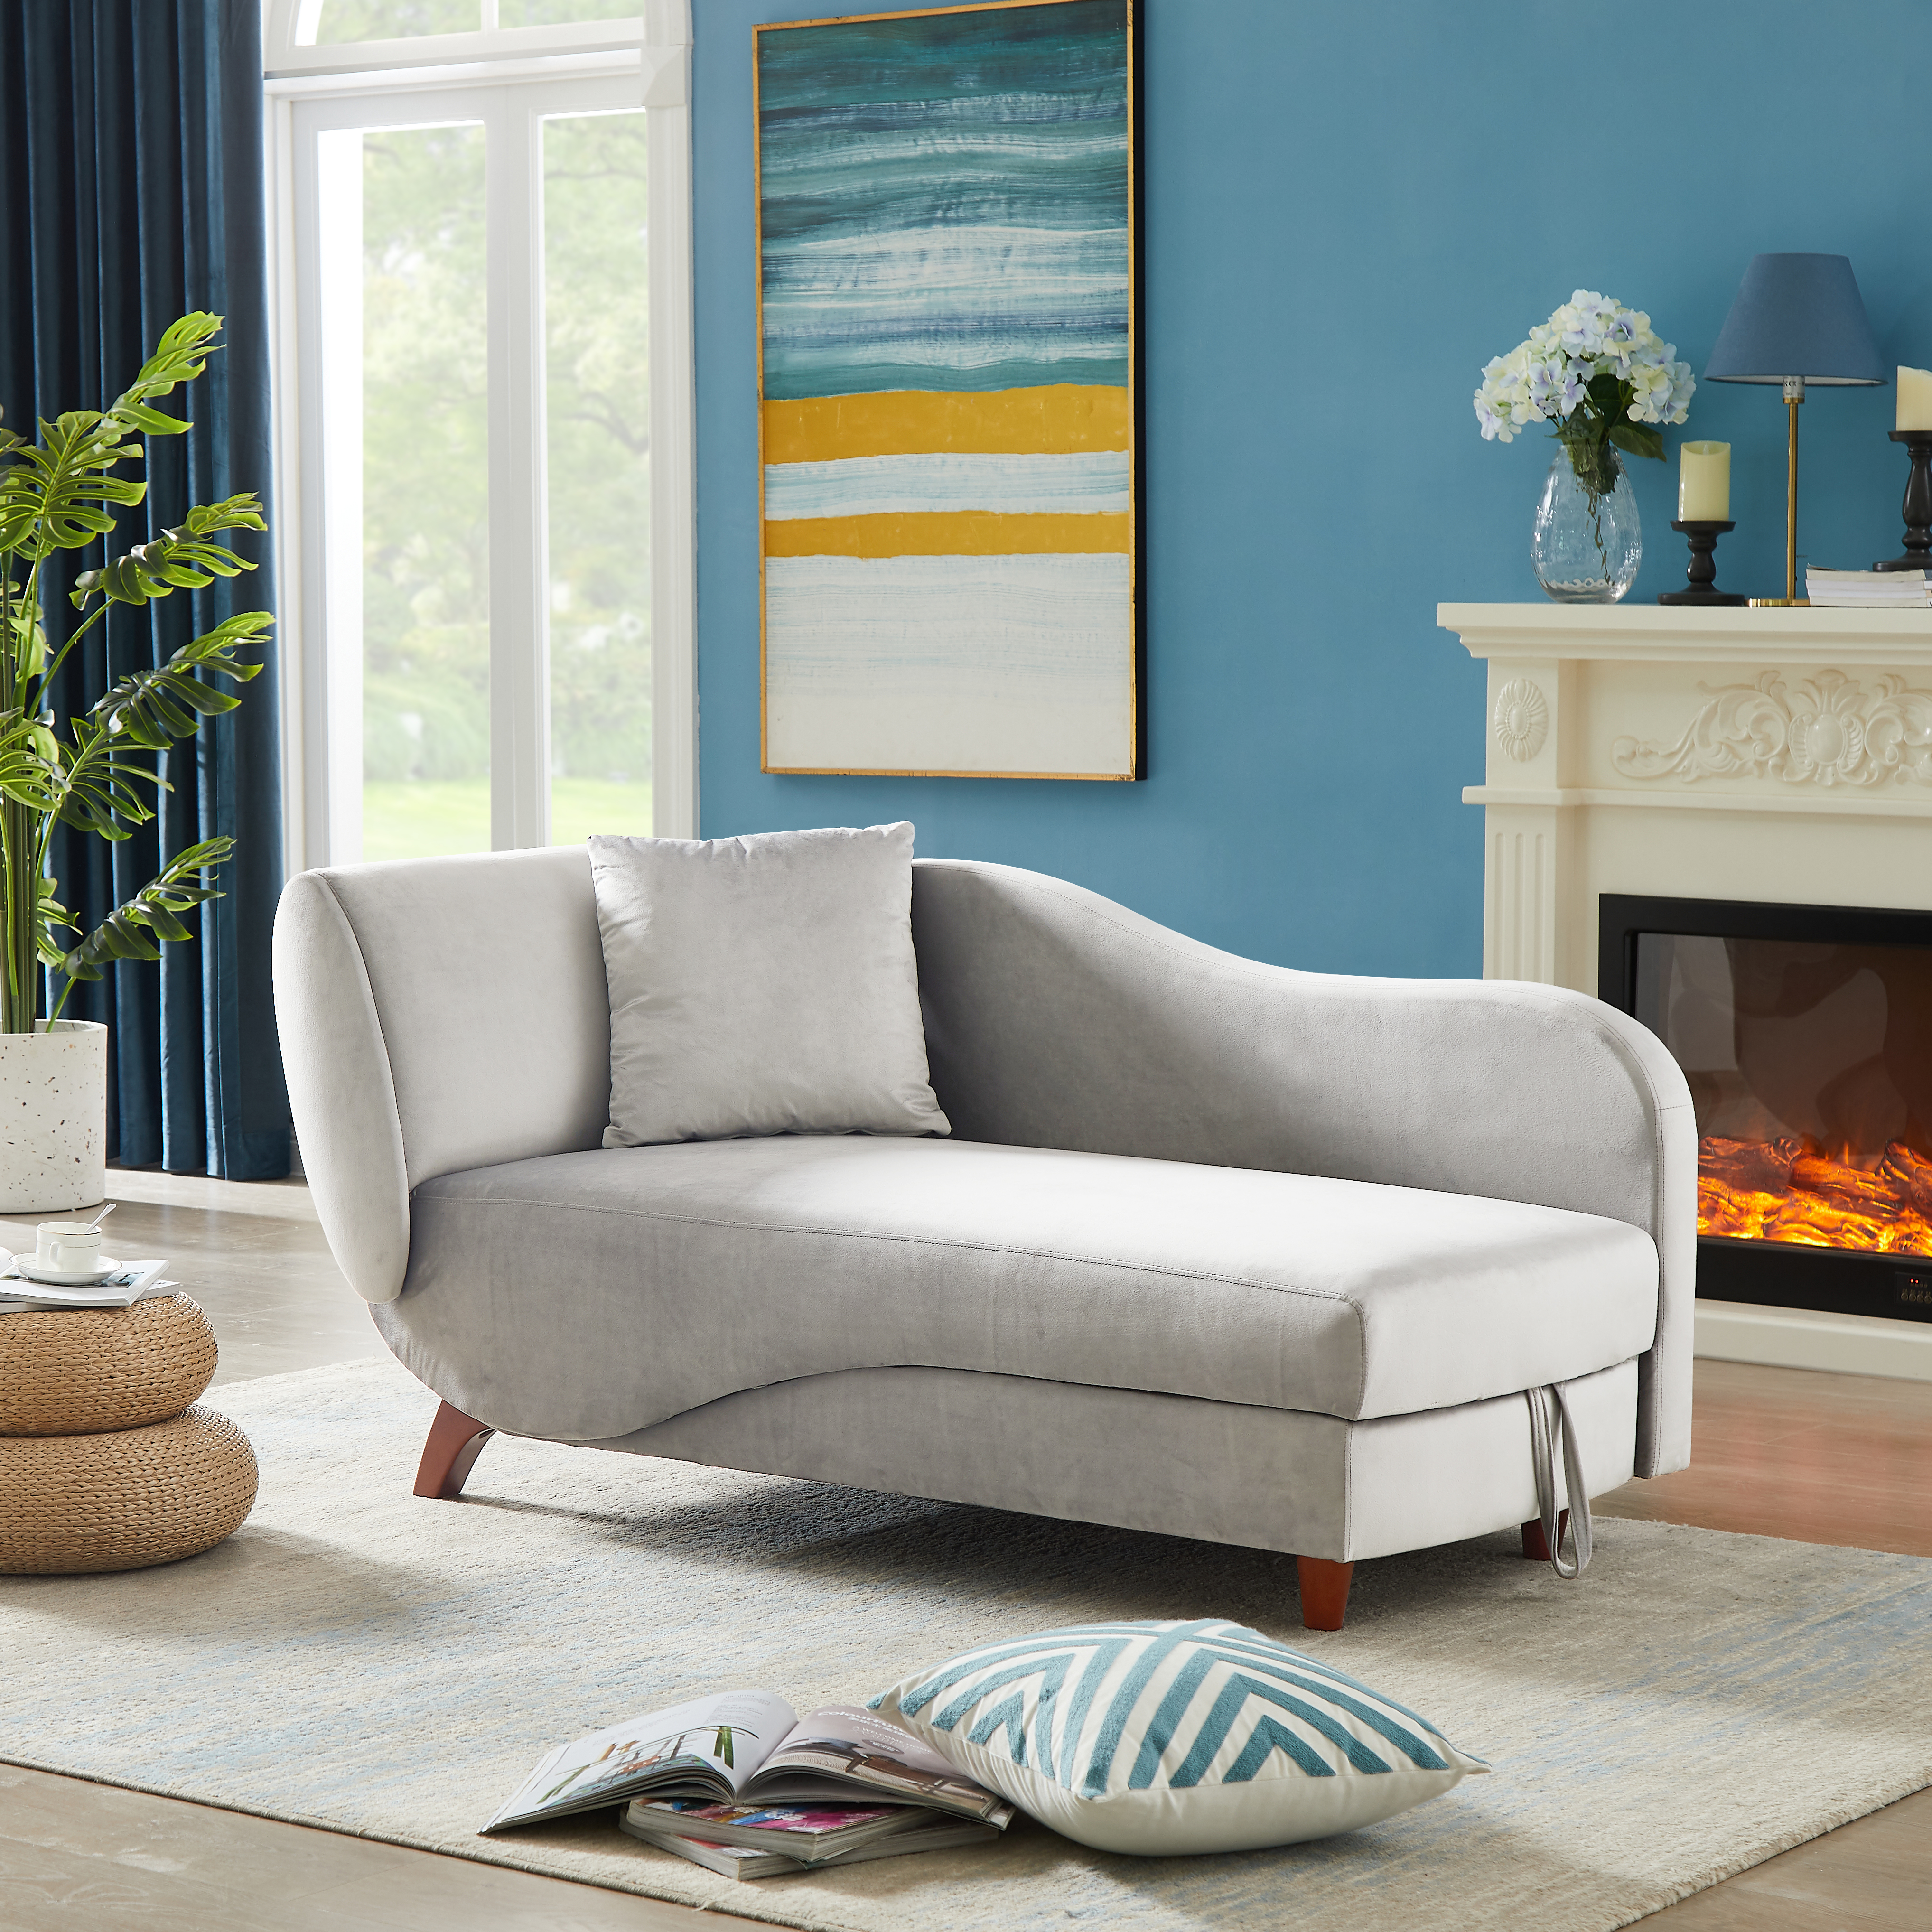 Artemax chaise lounge with storage and solid wood legs-Boyel Living